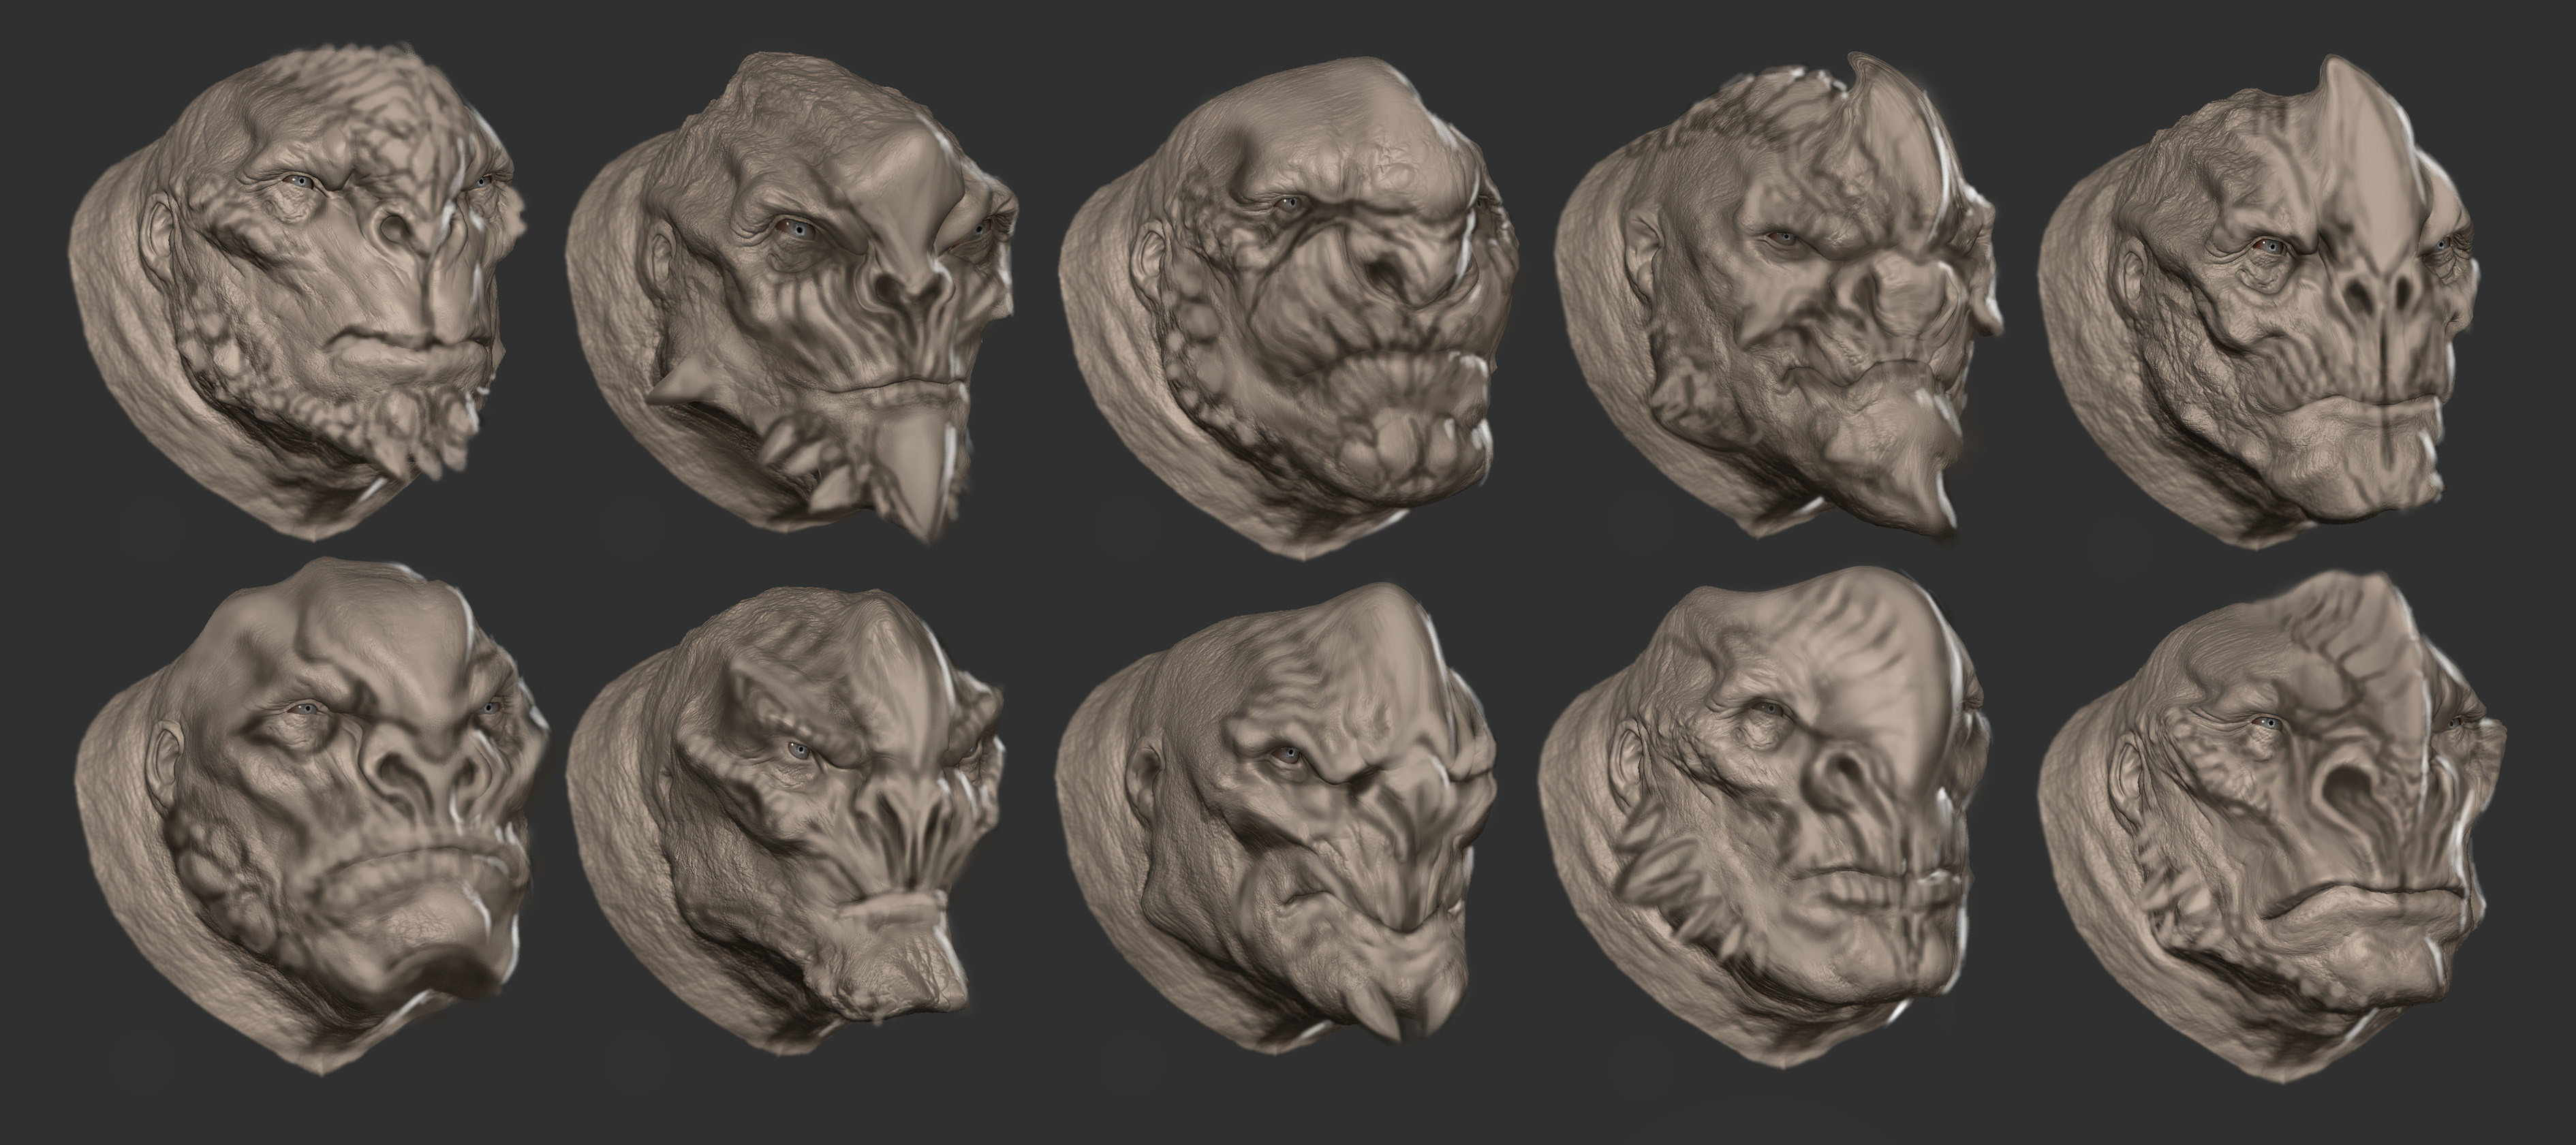 Head designs experimenting with stretching our stylization level and integrating more of the narrative that Ologs are actually dragon hyrbrids.